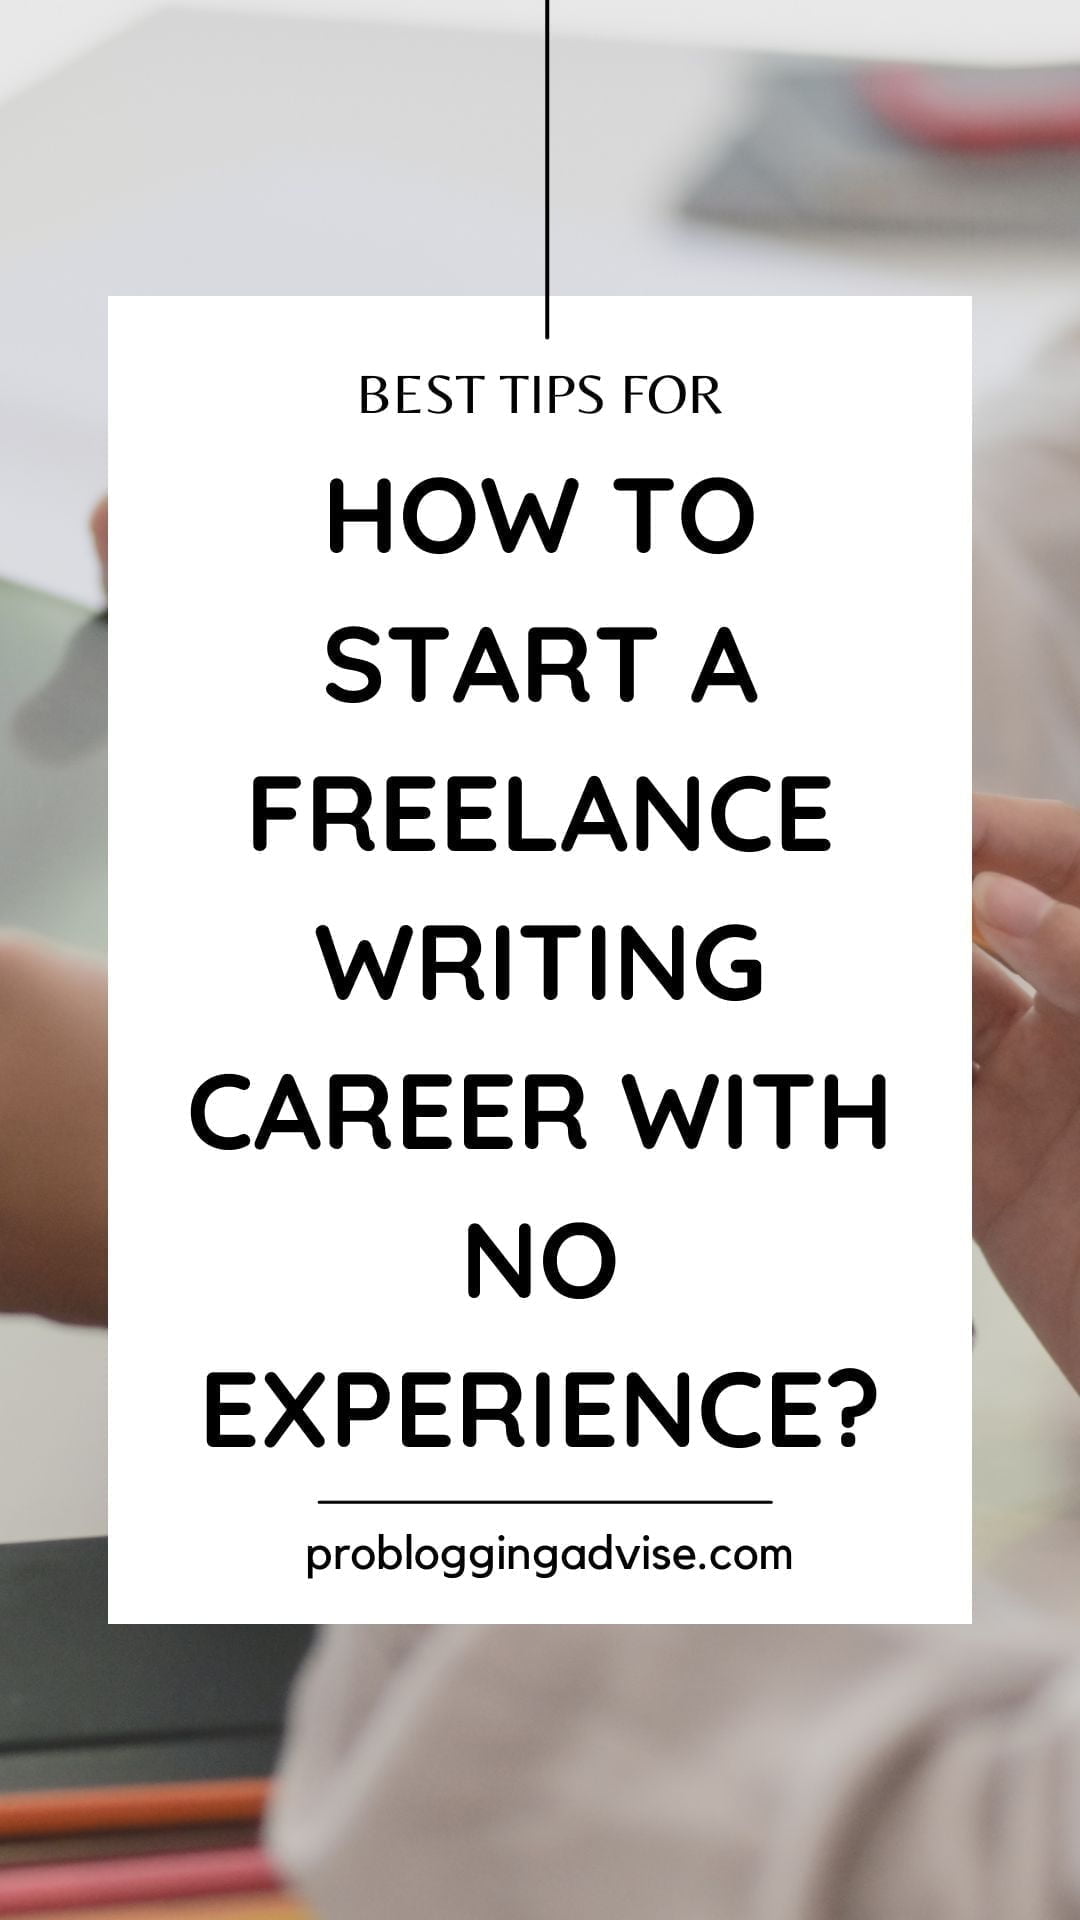 How to start a freelance writing career with no experience